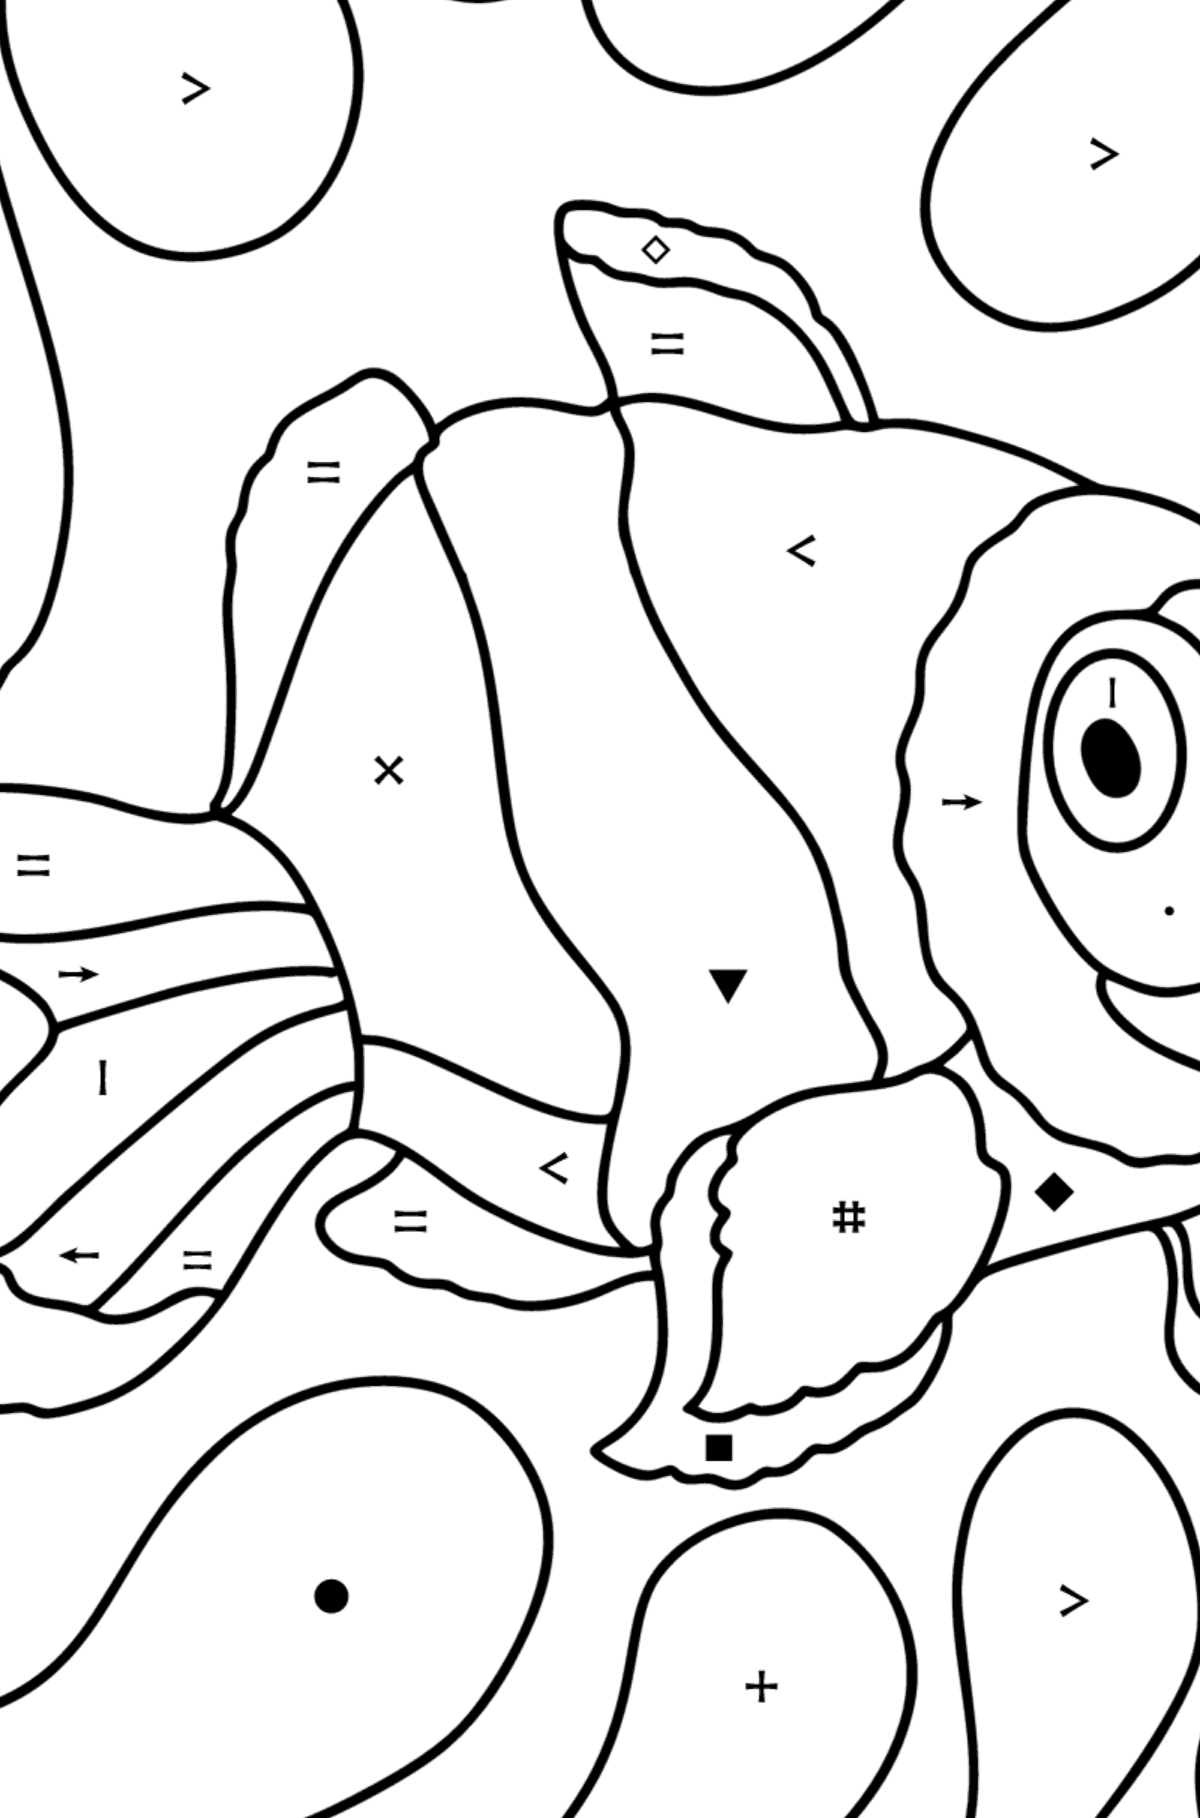 Clown fish coloring page - Coloring by Symbols for Kids